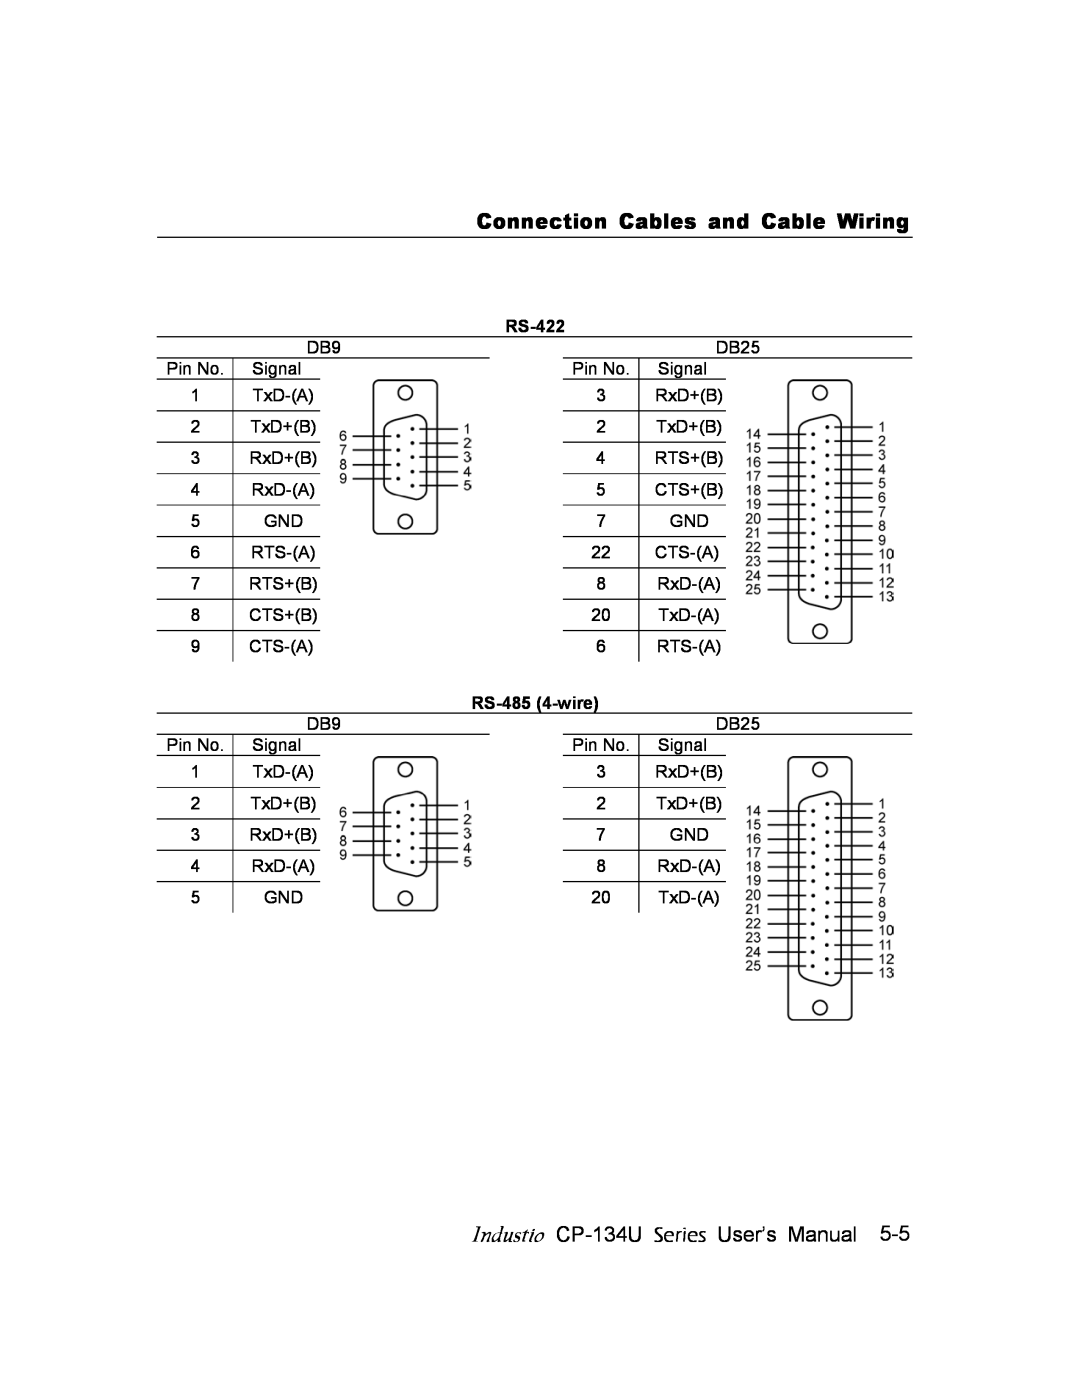 Moxa Technologies RS-422, RS-485 4-wire, Connection Cables and Cable Wiring, Industio CP-134U Series User’s Manual 